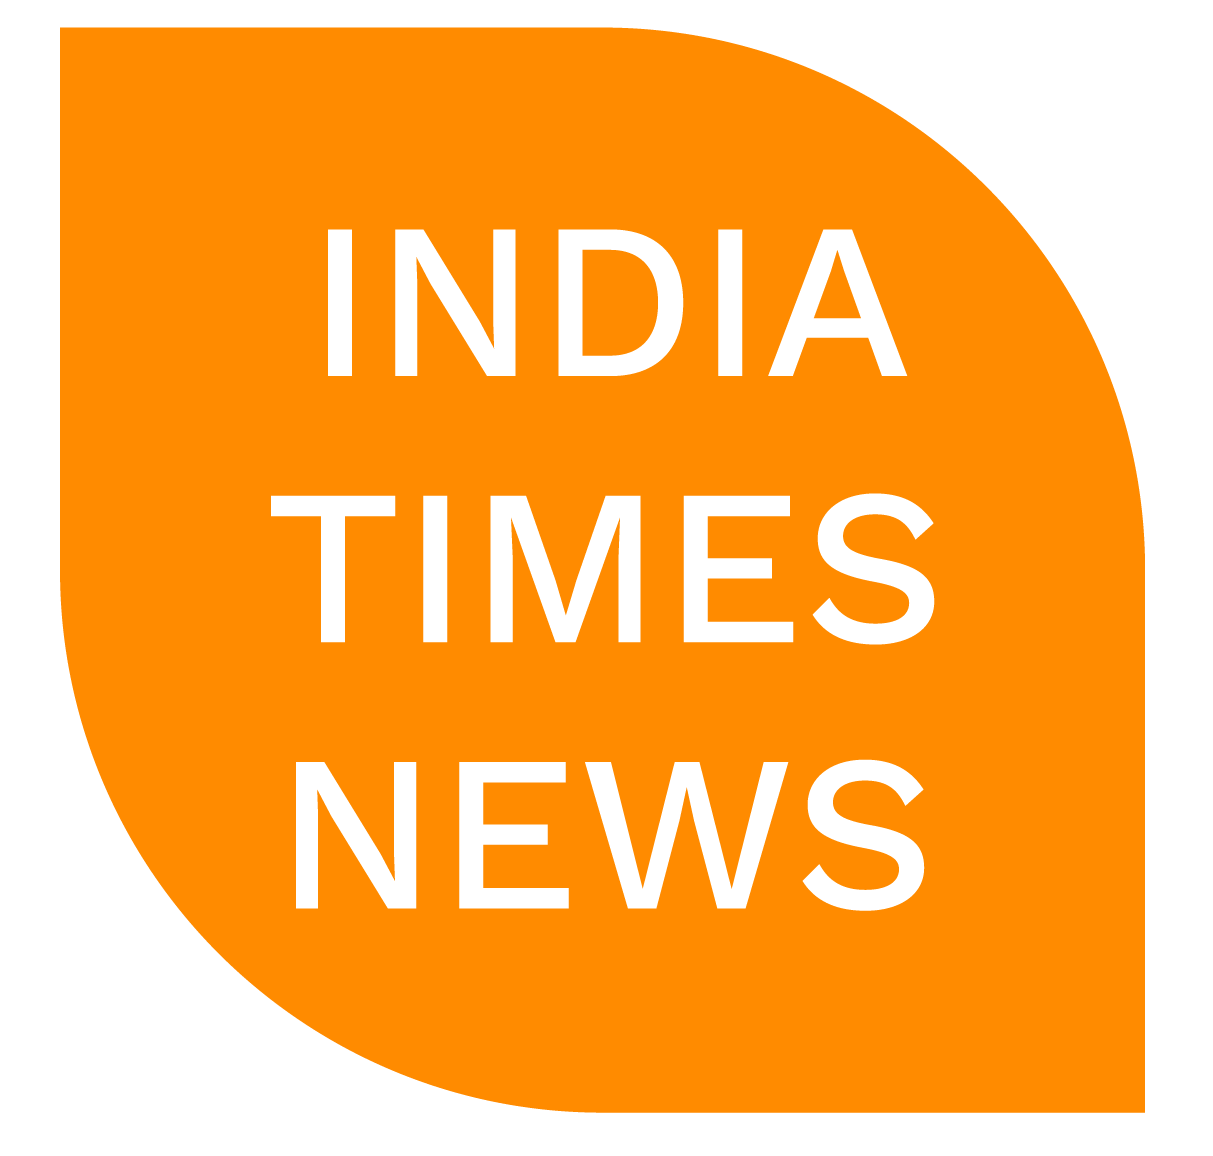 India Times News